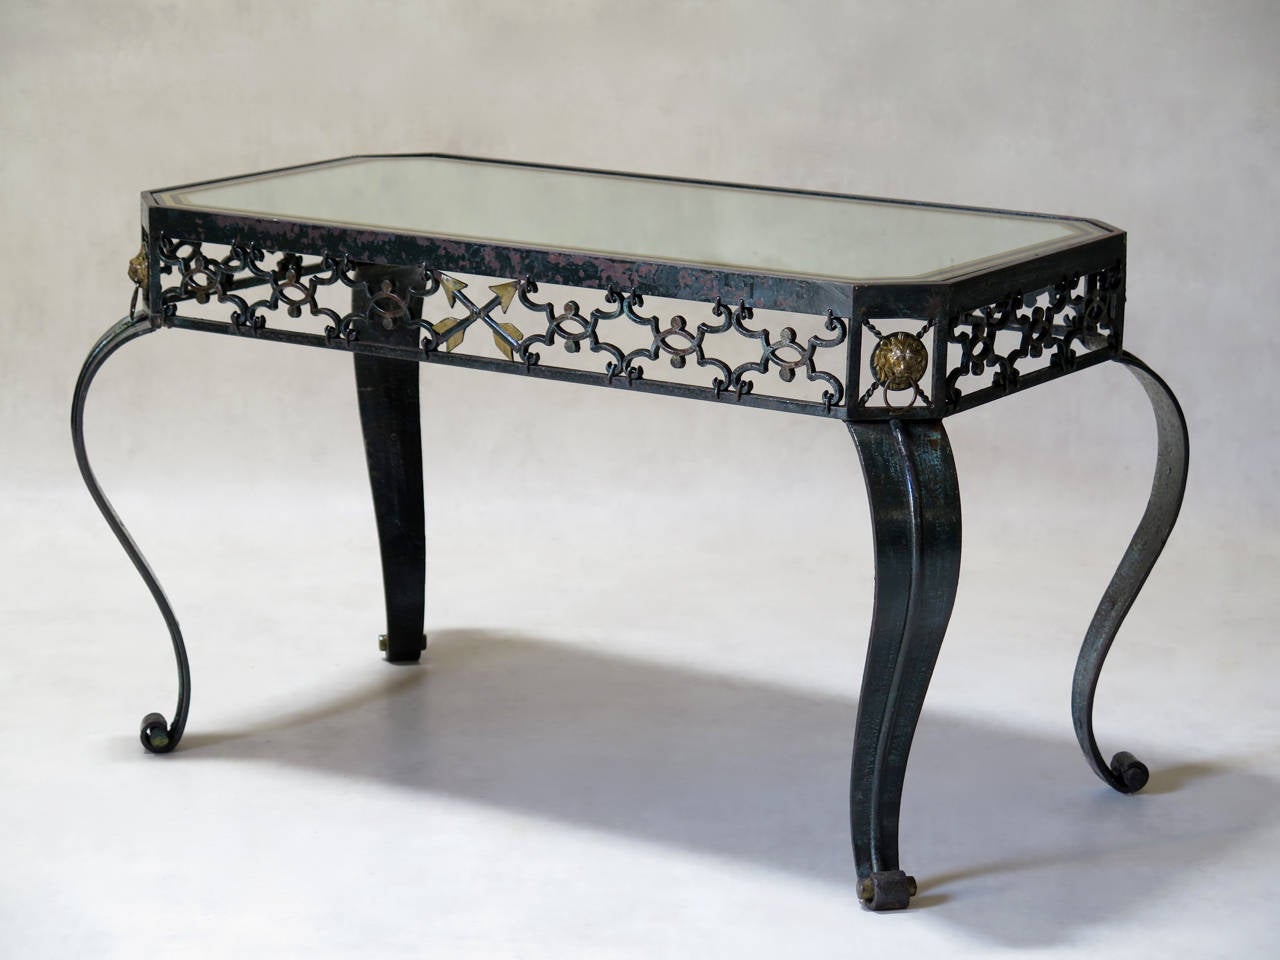 Chic trio of heavy, wrought iron coffee and side tables: two small round ones and one rectangular, painted dark green with gilt details. The two round tables have glass tops with mirrored borders; the rectangular table has a mirrored top with a